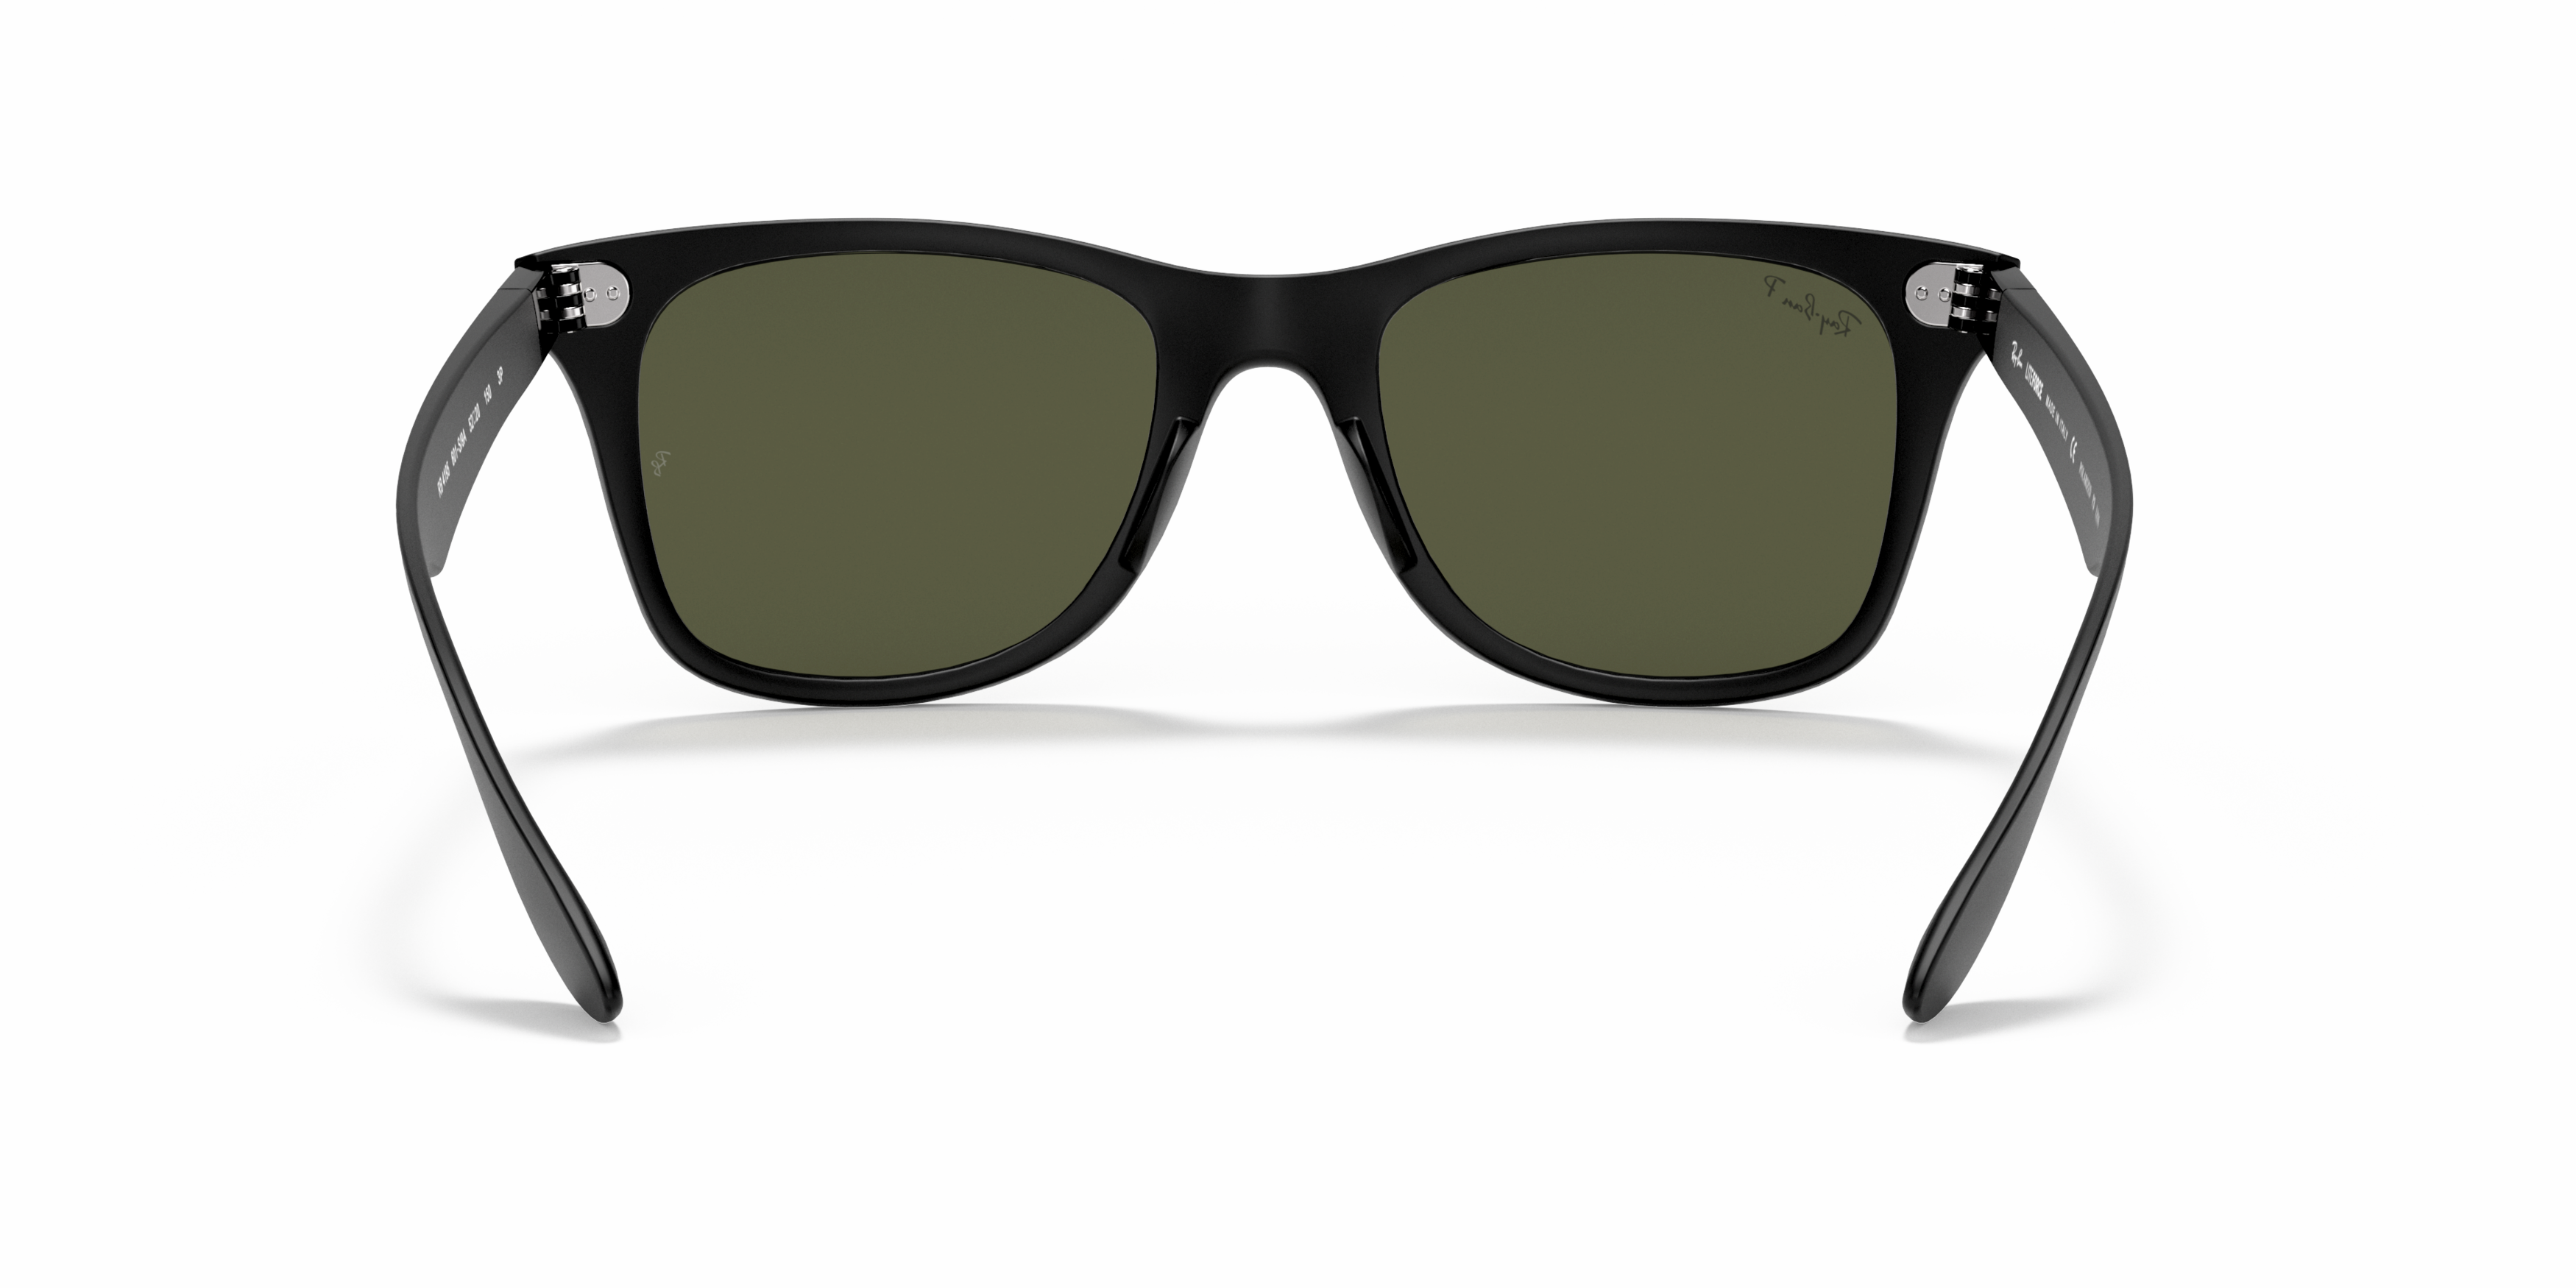 [products.image.detail02] Ray Ban Wayfarer Liteforce 0RB4195 601S9A